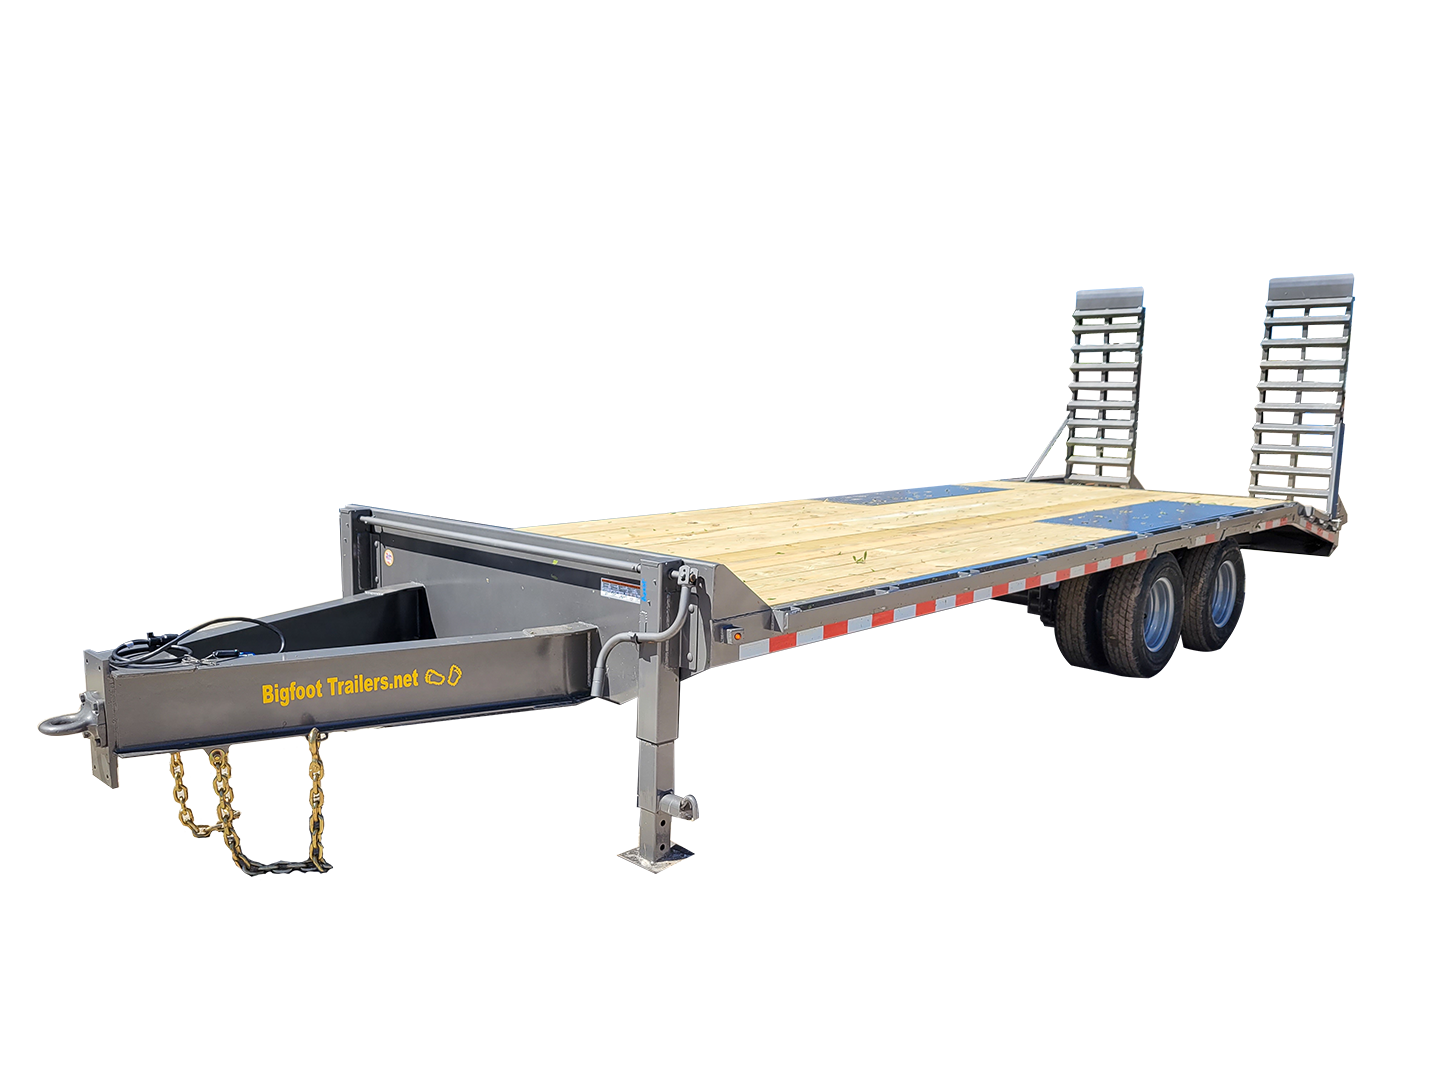 High quality bumper pull deckover trailers in Jacksonville & Mulberry FL